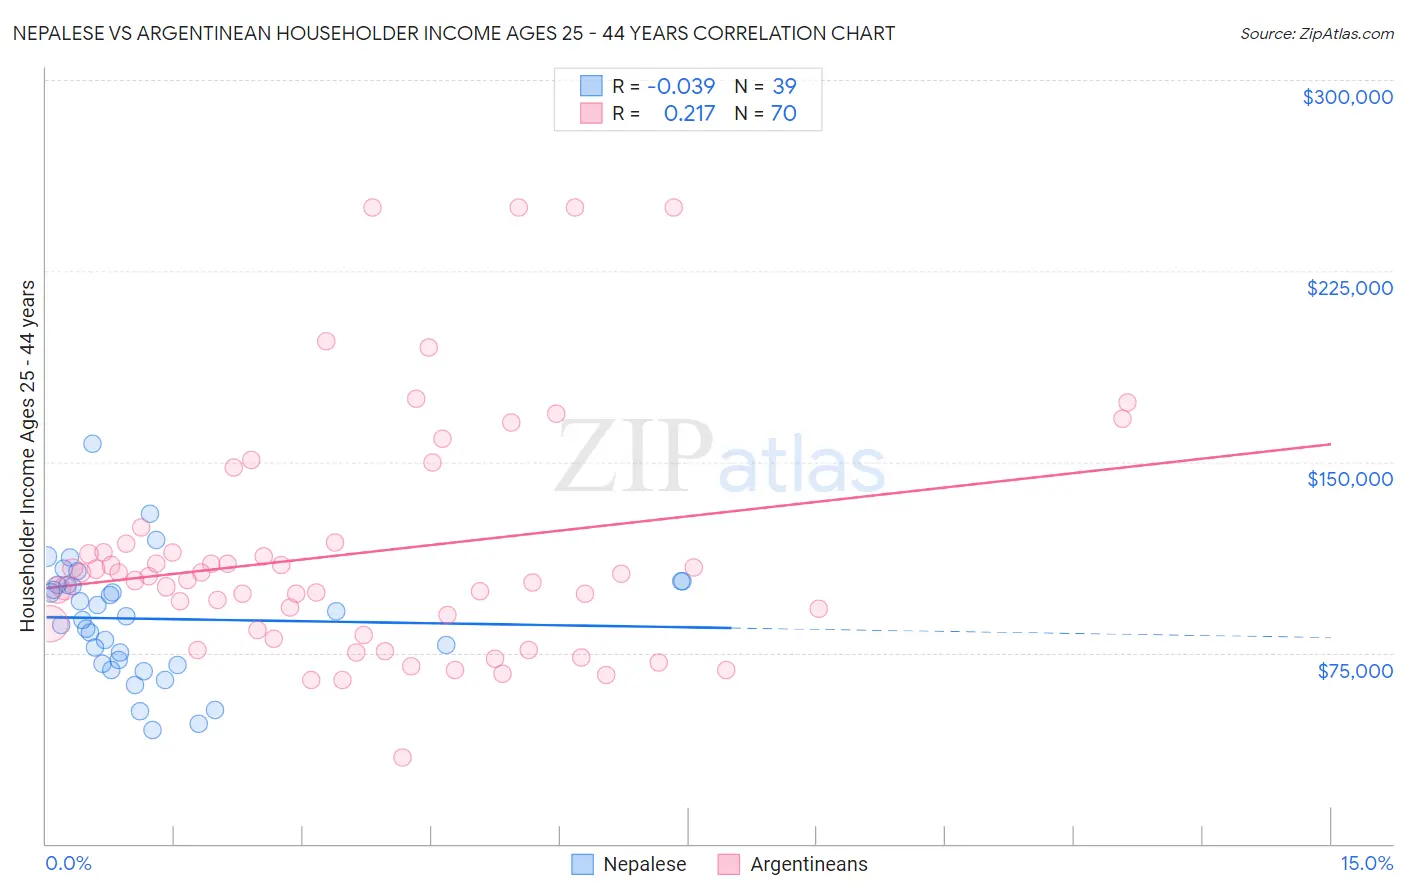 Nepalese vs Argentinean Householder Income Ages 25 - 44 years